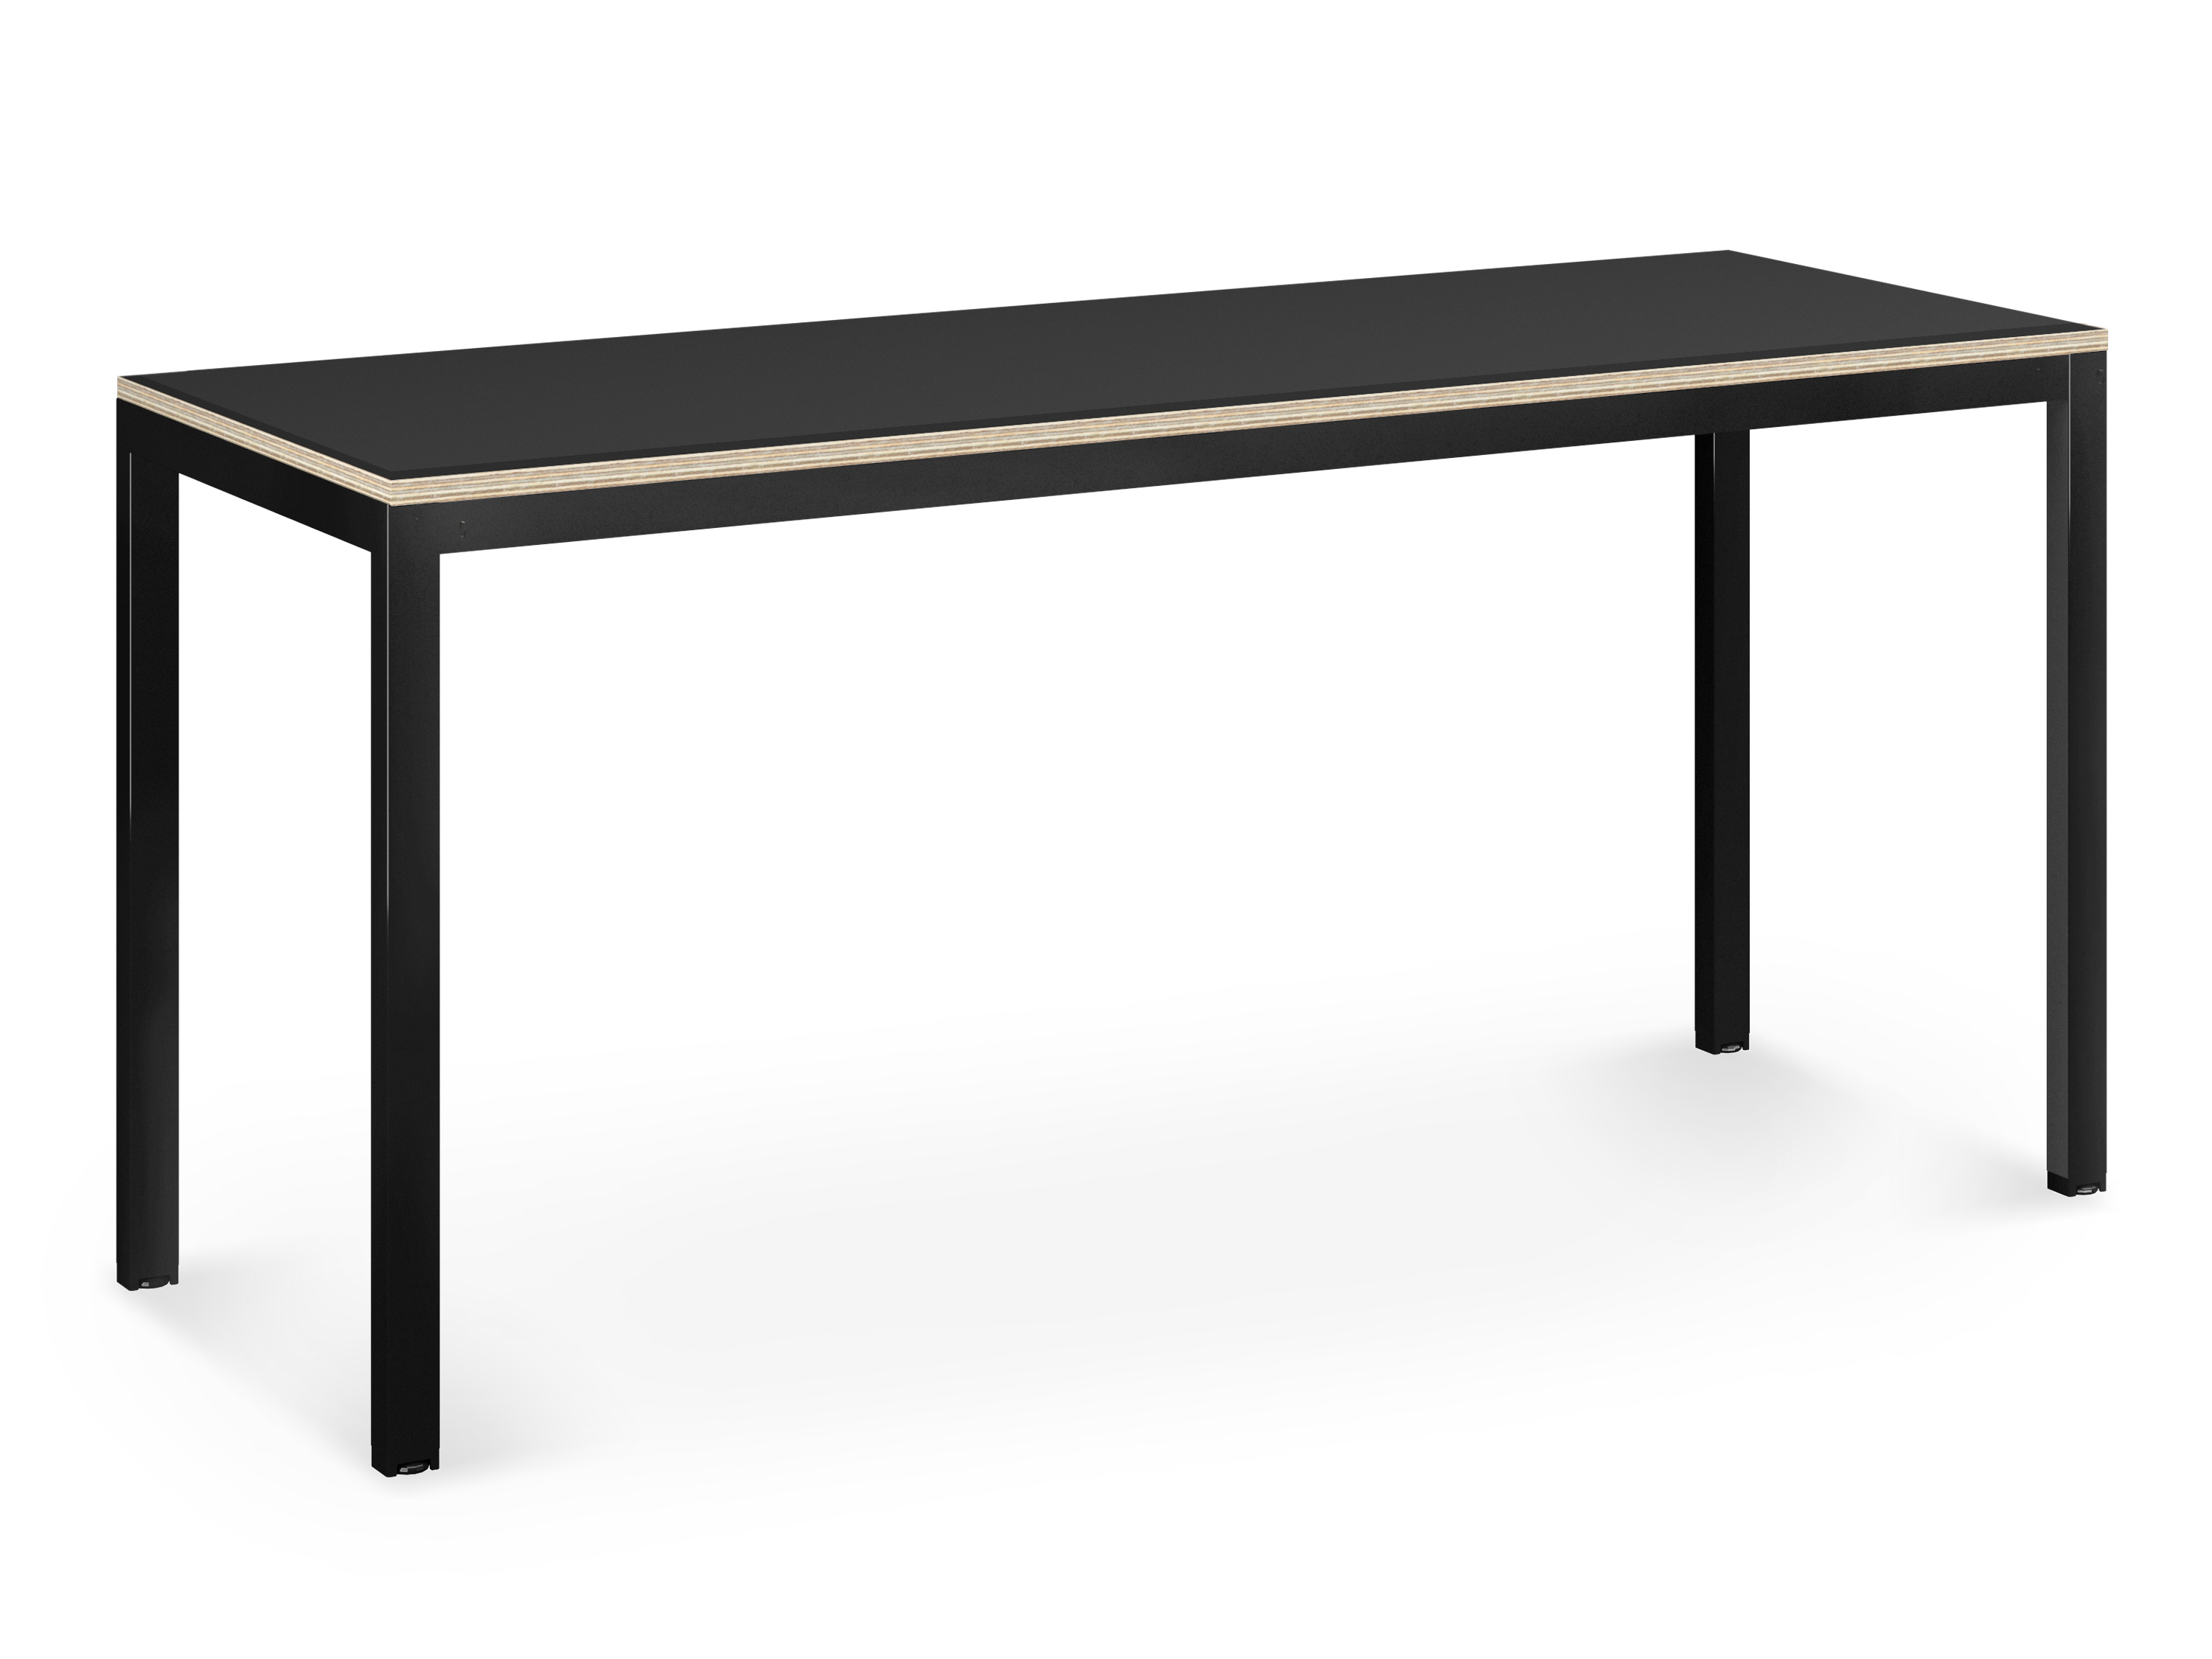 WS -Co.Stories desk - 1380 x 680 - Black Frame, Black top with ply edge